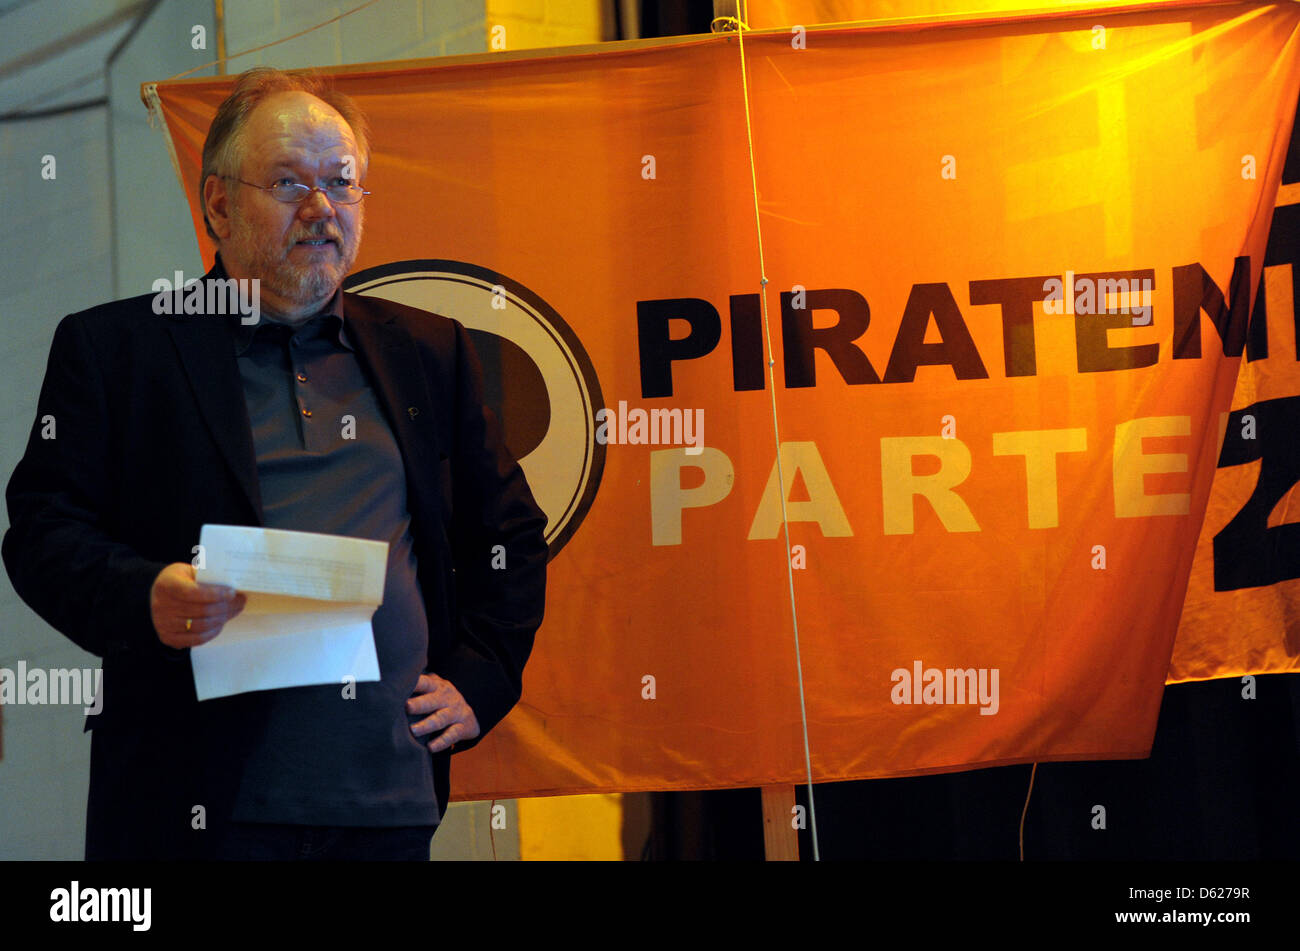 The top candidate of the Pirate Party, Joachim Paul, prepares for a speech after the favorable election outcome of the party in of the North Rhine-Westphalian state elections at an election night party in Duesseldorf, Germany, 13 May 2012. Photo: Caroline Seidel Stock Photo